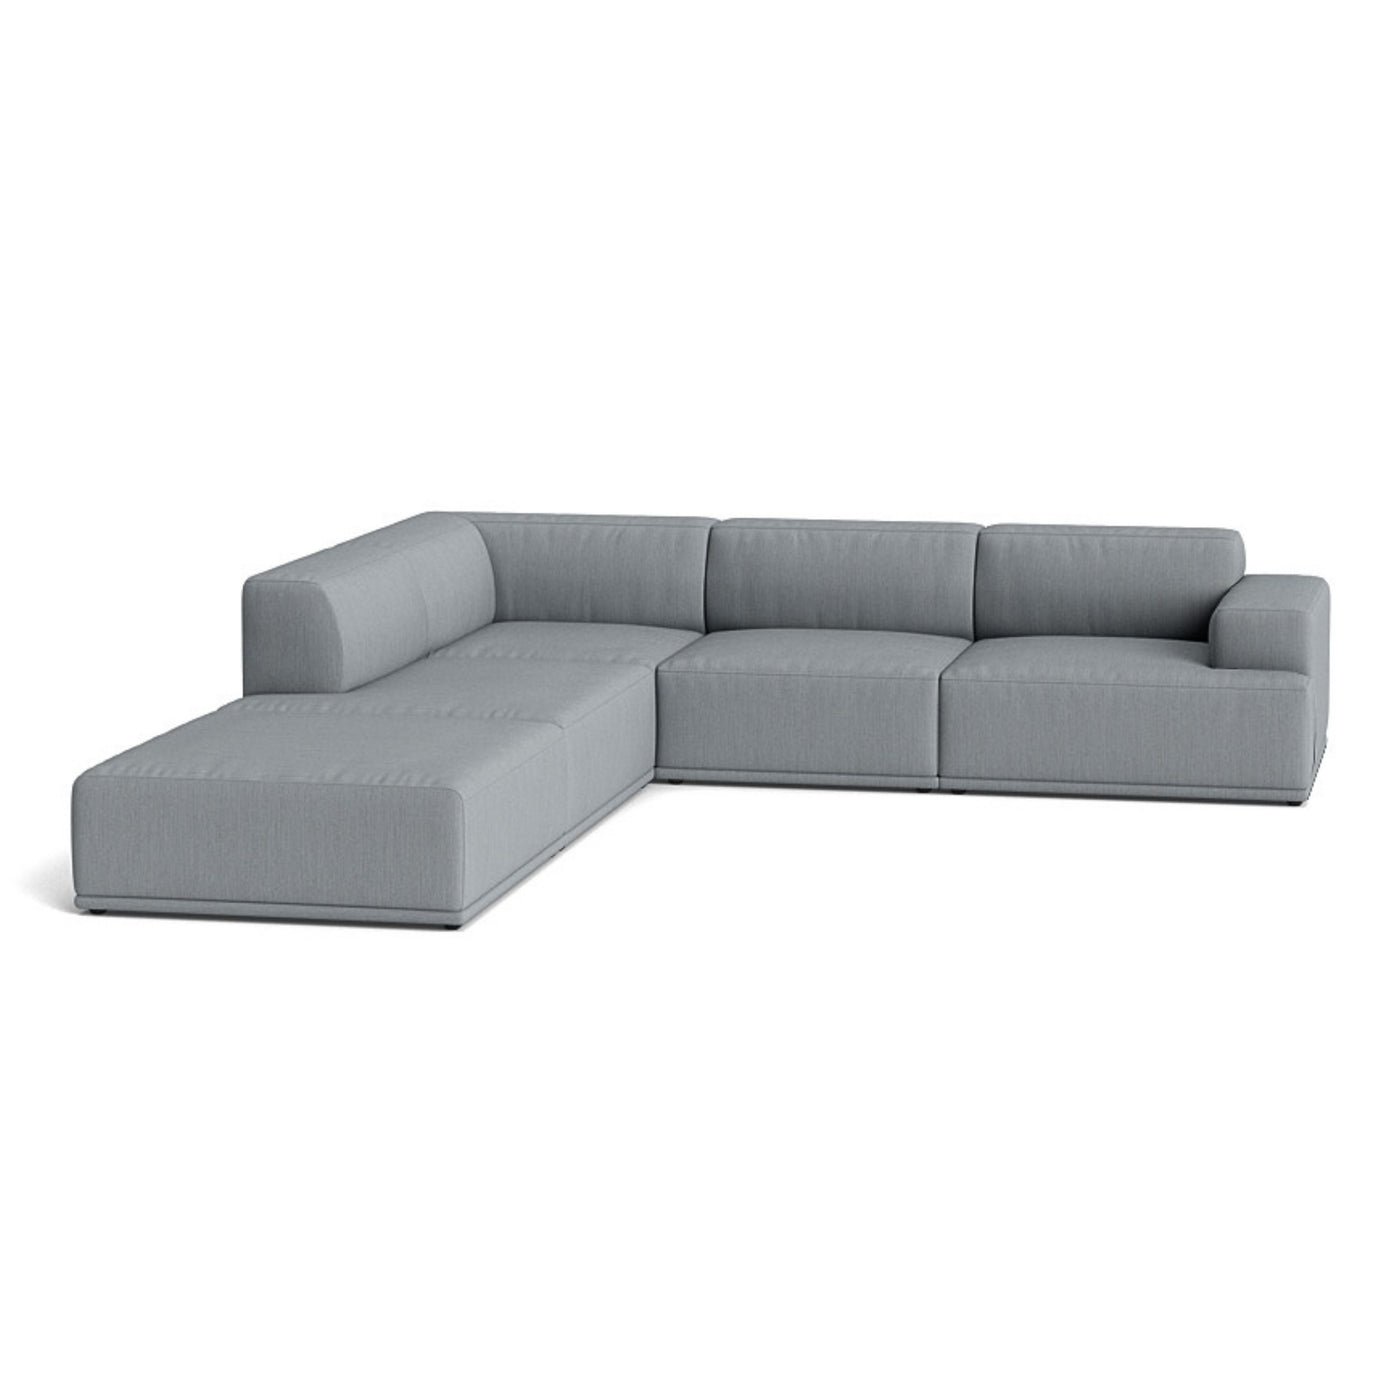 Muuto Connect Soft Modular Corner Sofa, configuration 1. Made-to-order from someday designs. #colour_balder-1775